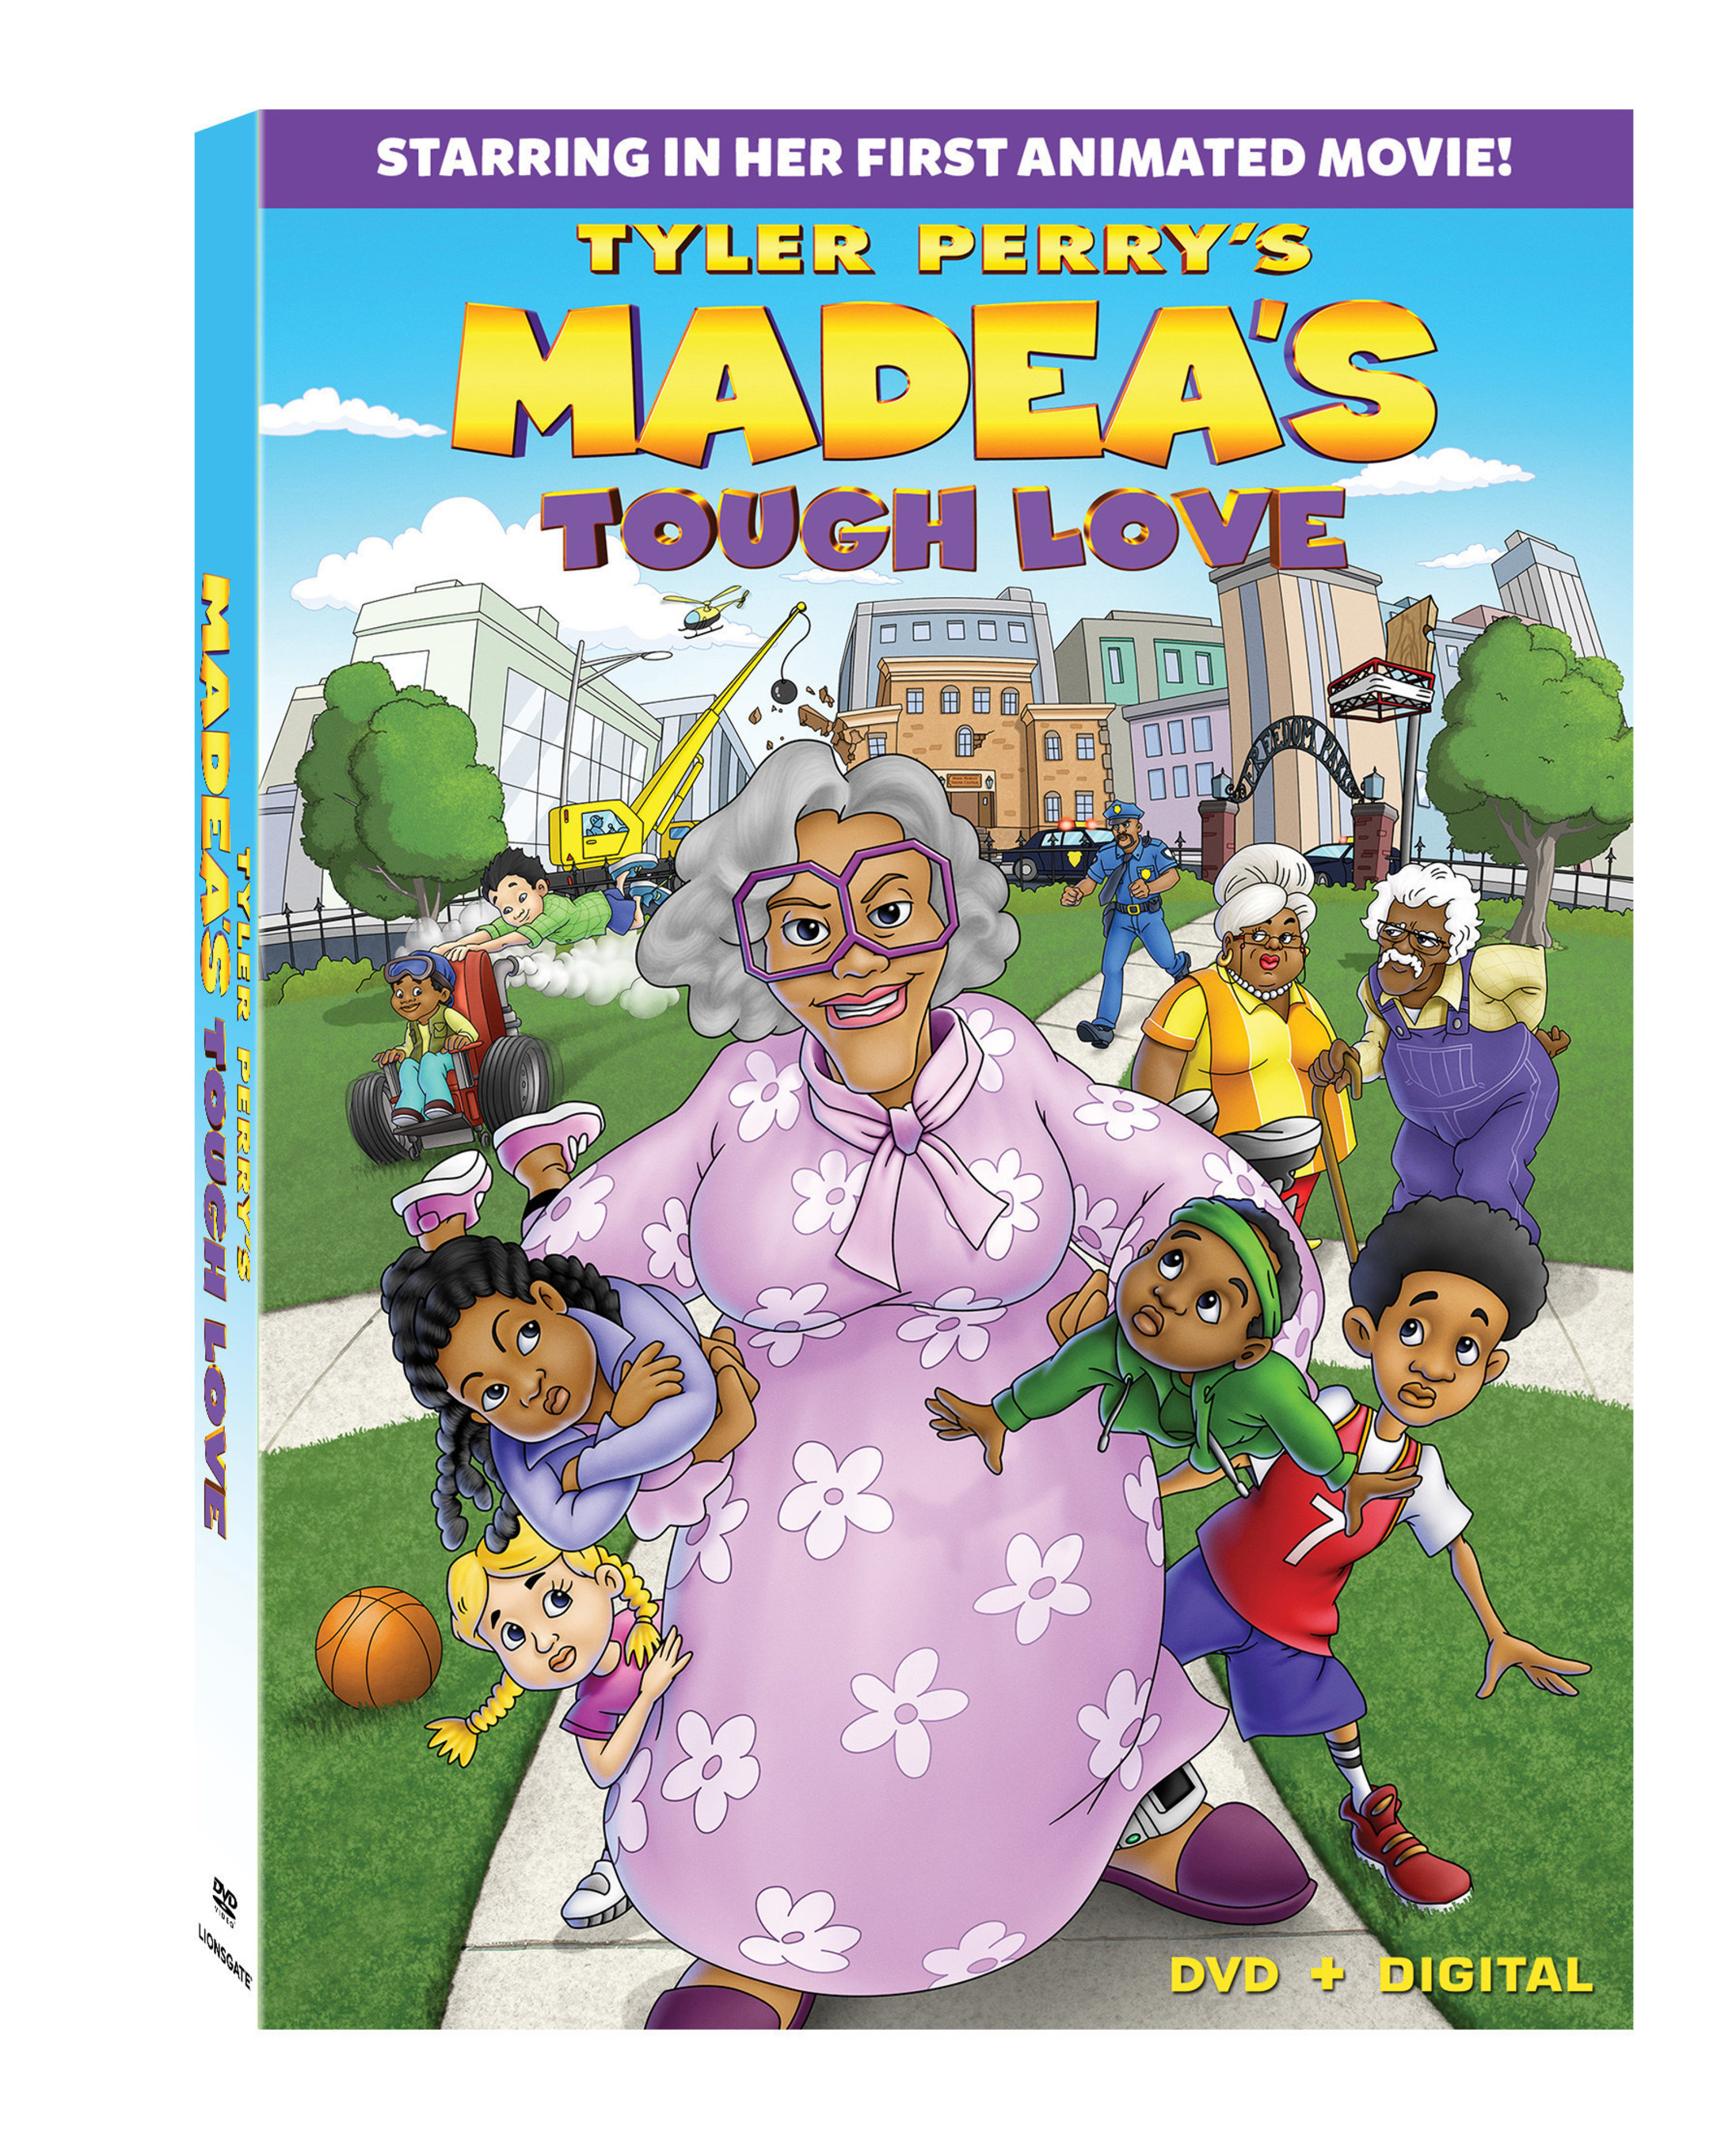 SEE MADEA LIKE NEVER BEFORE IN TYLER PERRY'S FIRST ANIMATED FAMILY FILM,  